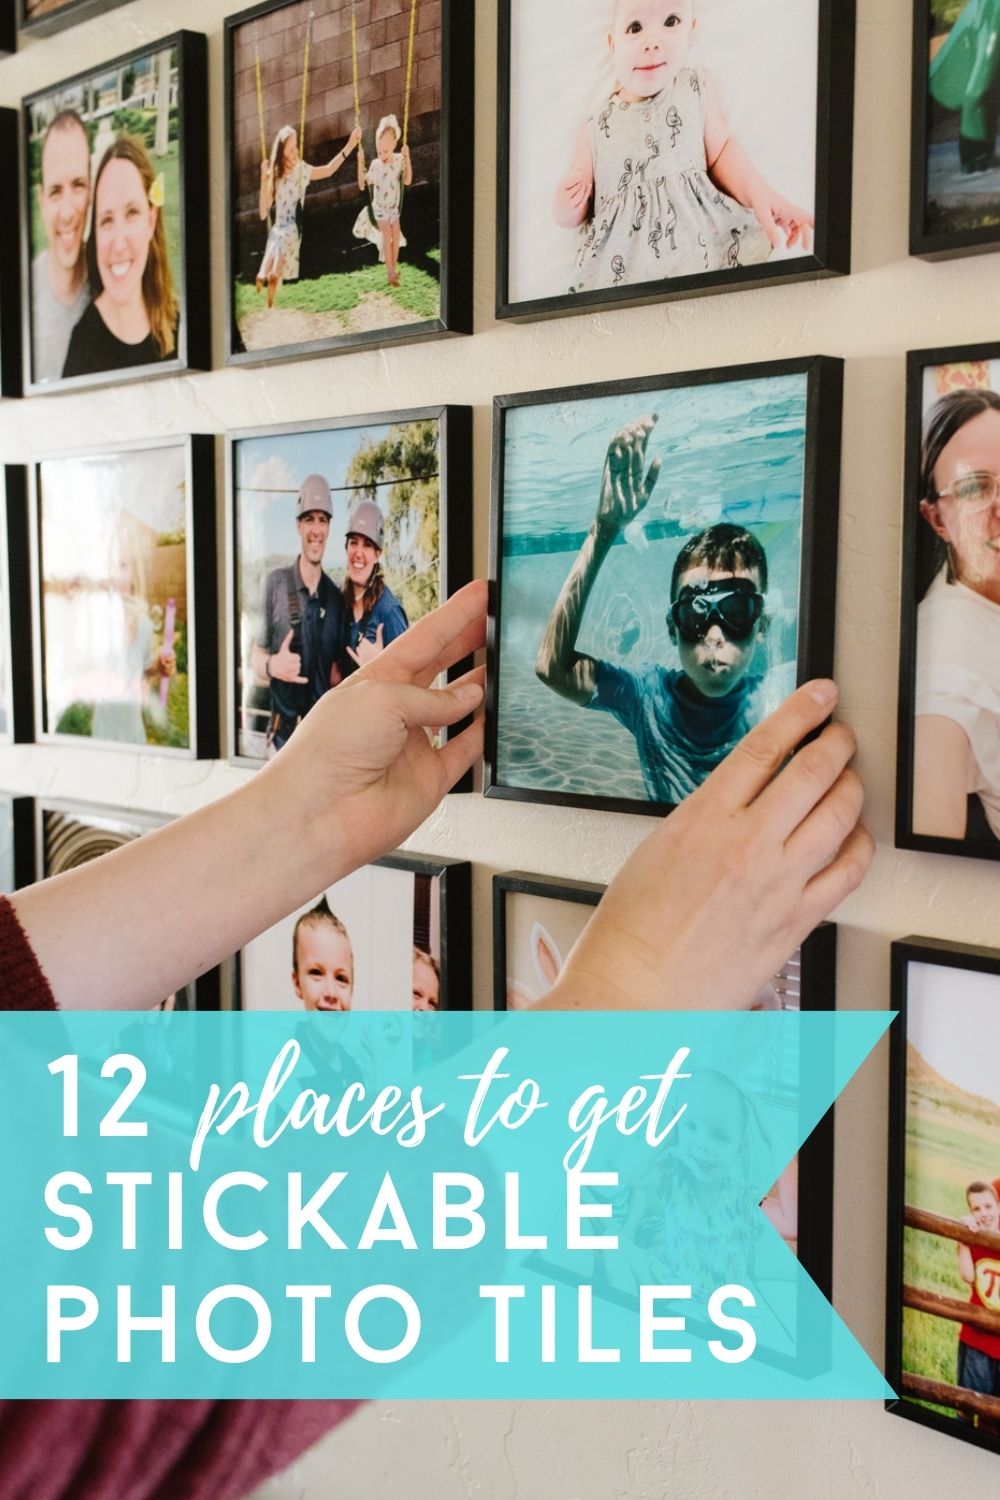 Stickable Photo Tiles - 12 different retailers and who we